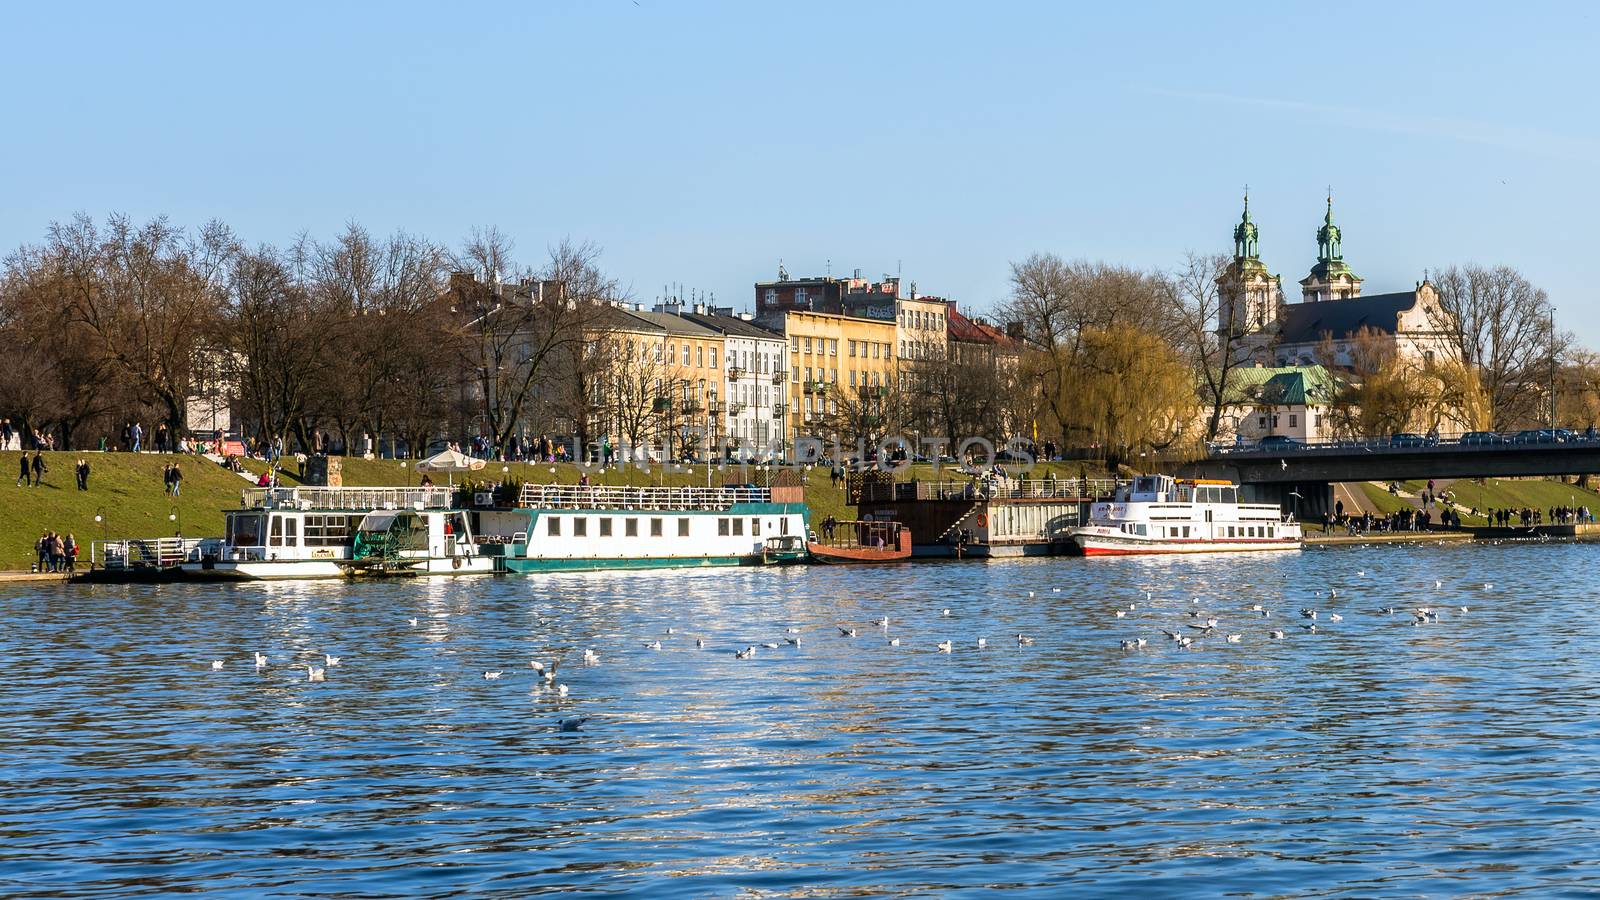 Pleasure boats moored at the harbor on Vistula river in Krakow, historical seat of Polish kings, the most popular destination in Poland.